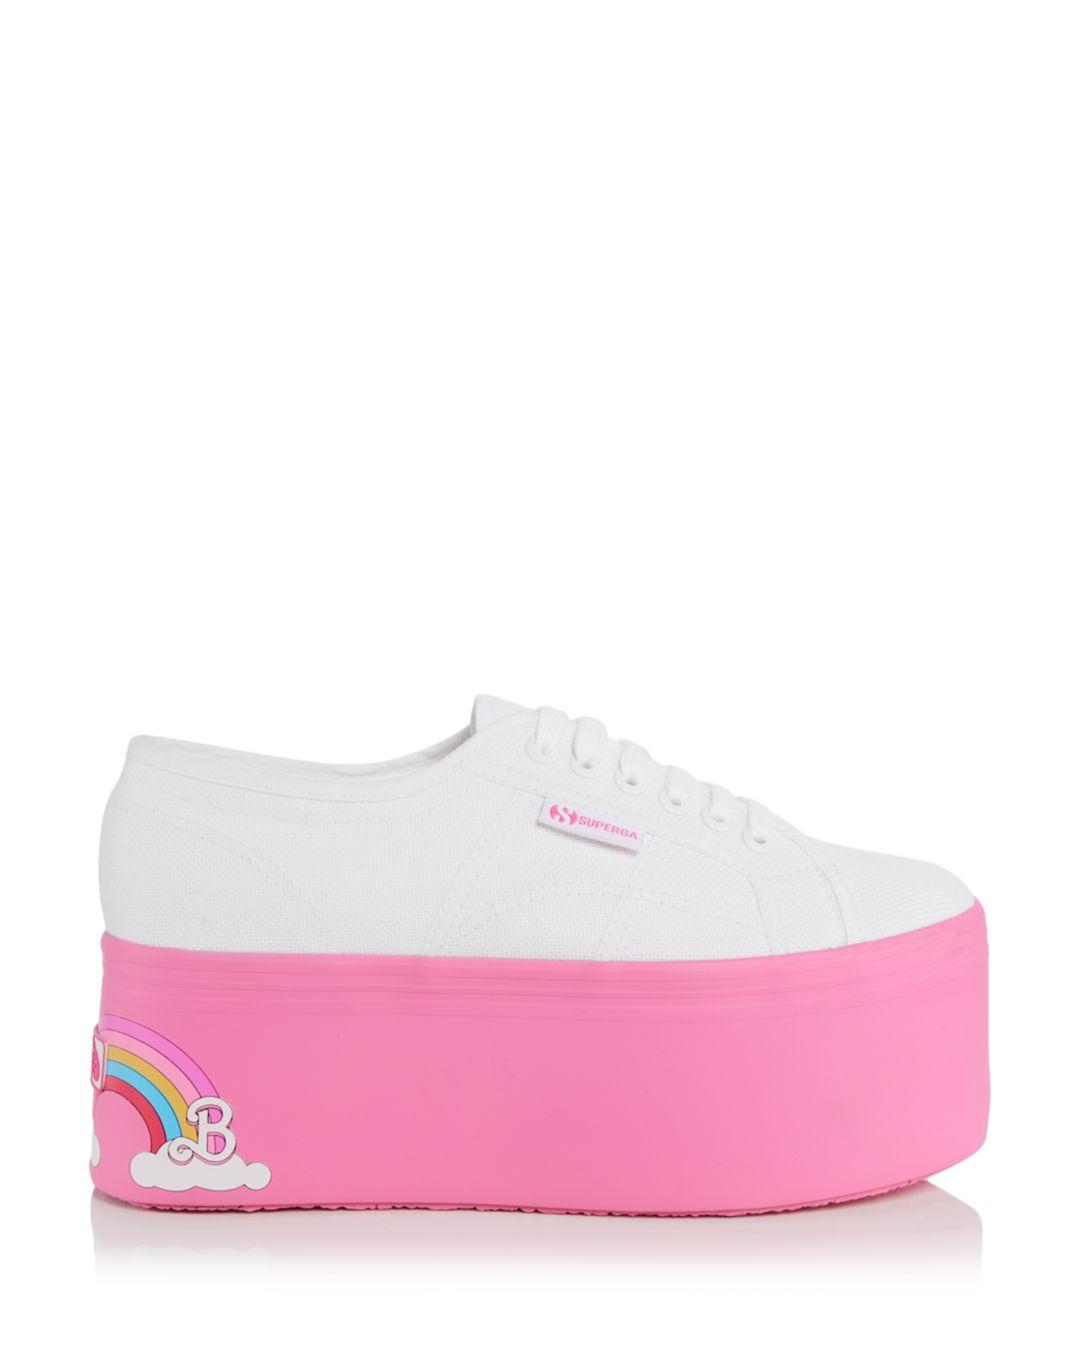 Superga X Barbie Rainbow Platform Lace Up Sneakers in Pink | Lyst